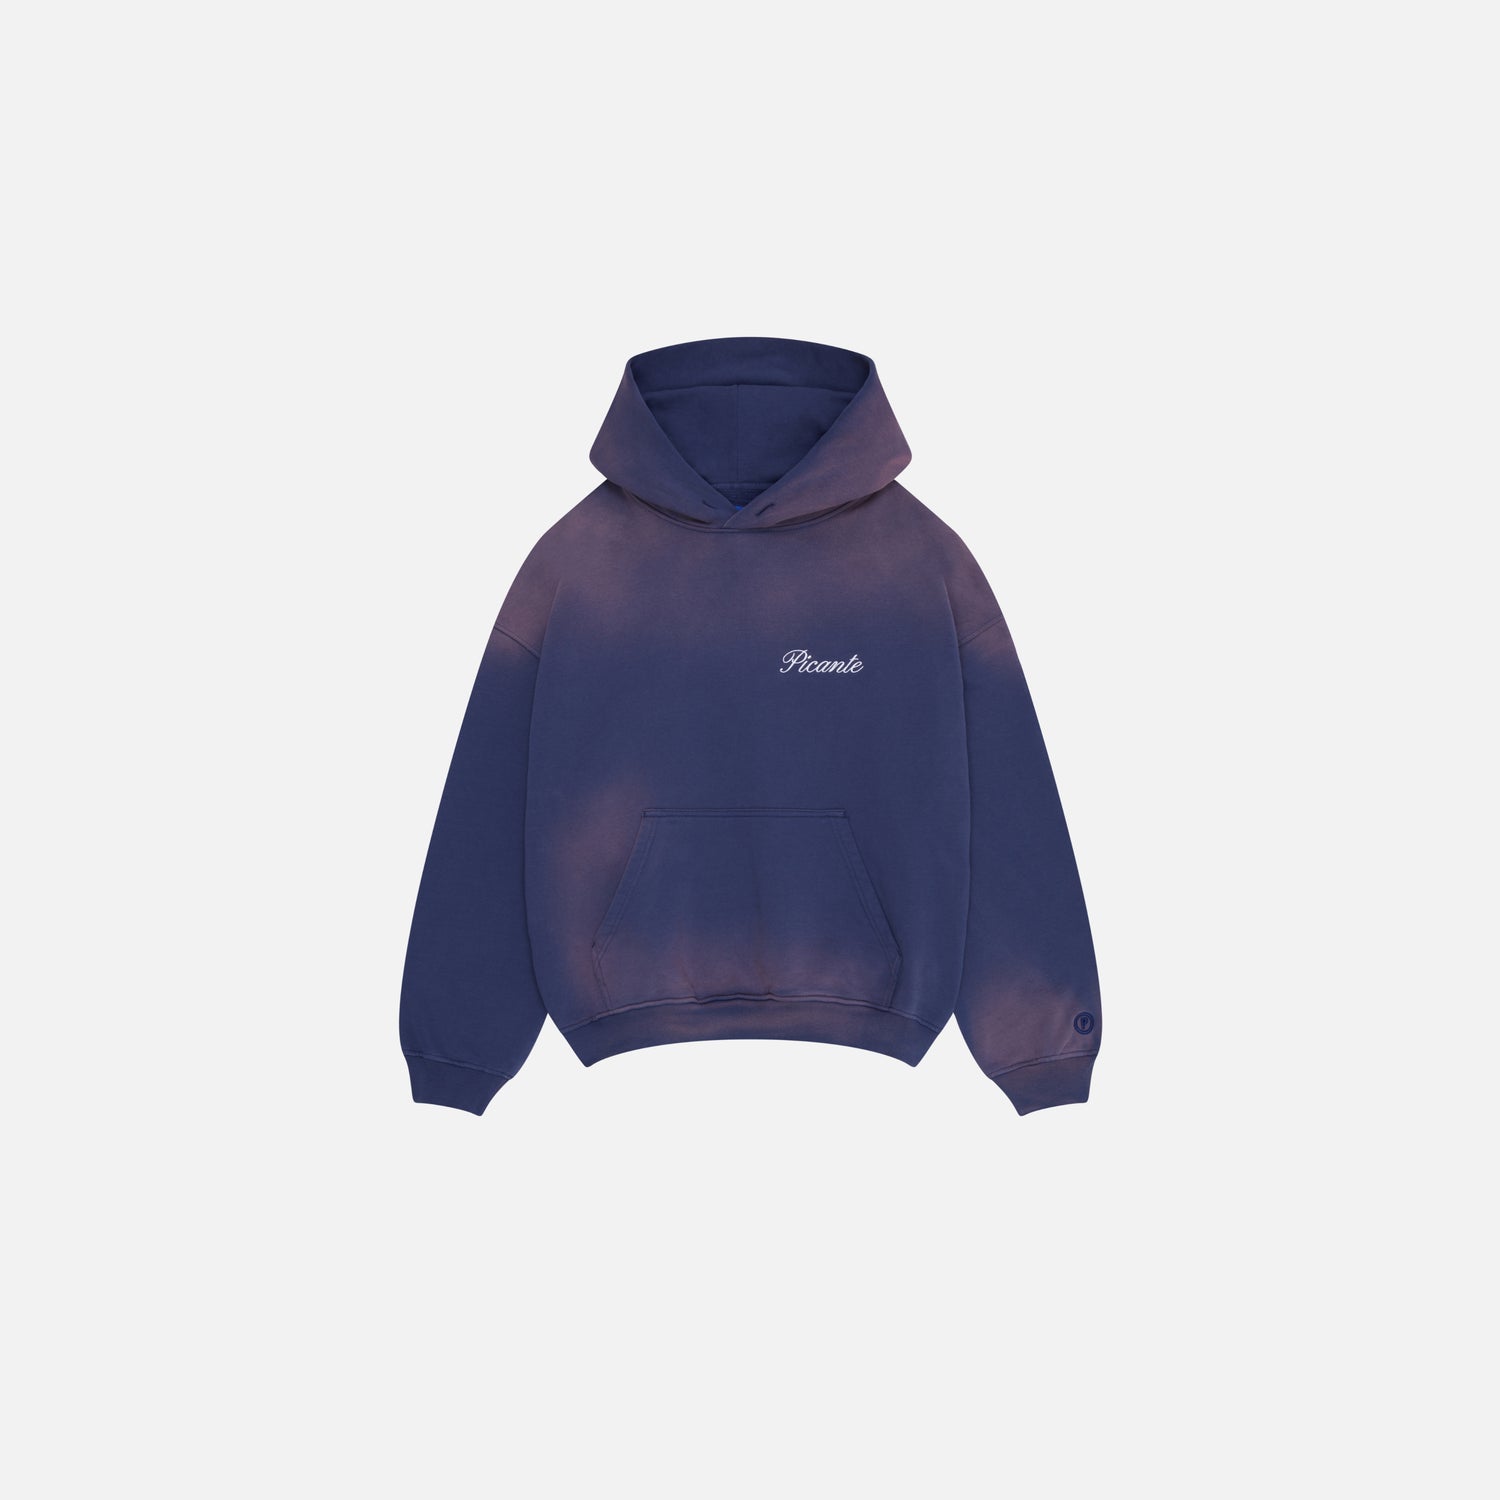 TAILOR HOODIE SUN-FADED SKYDIVER